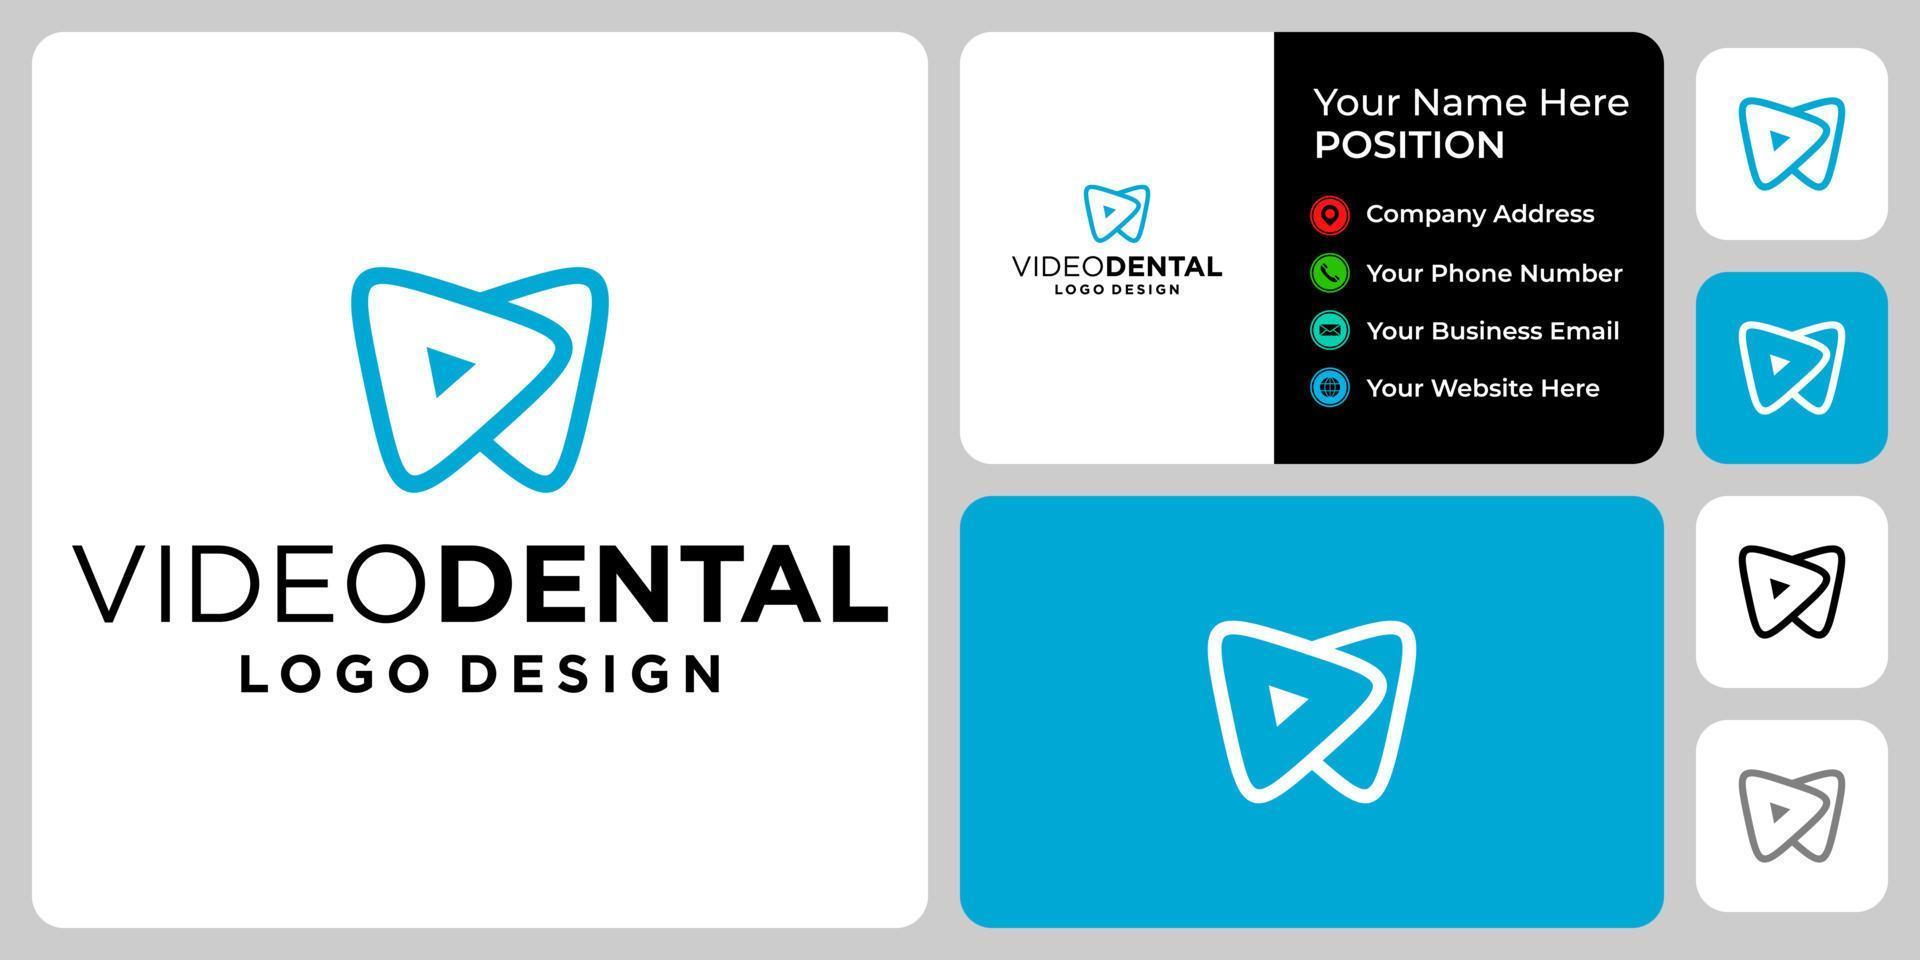 Video dental logo design with business card template. vector